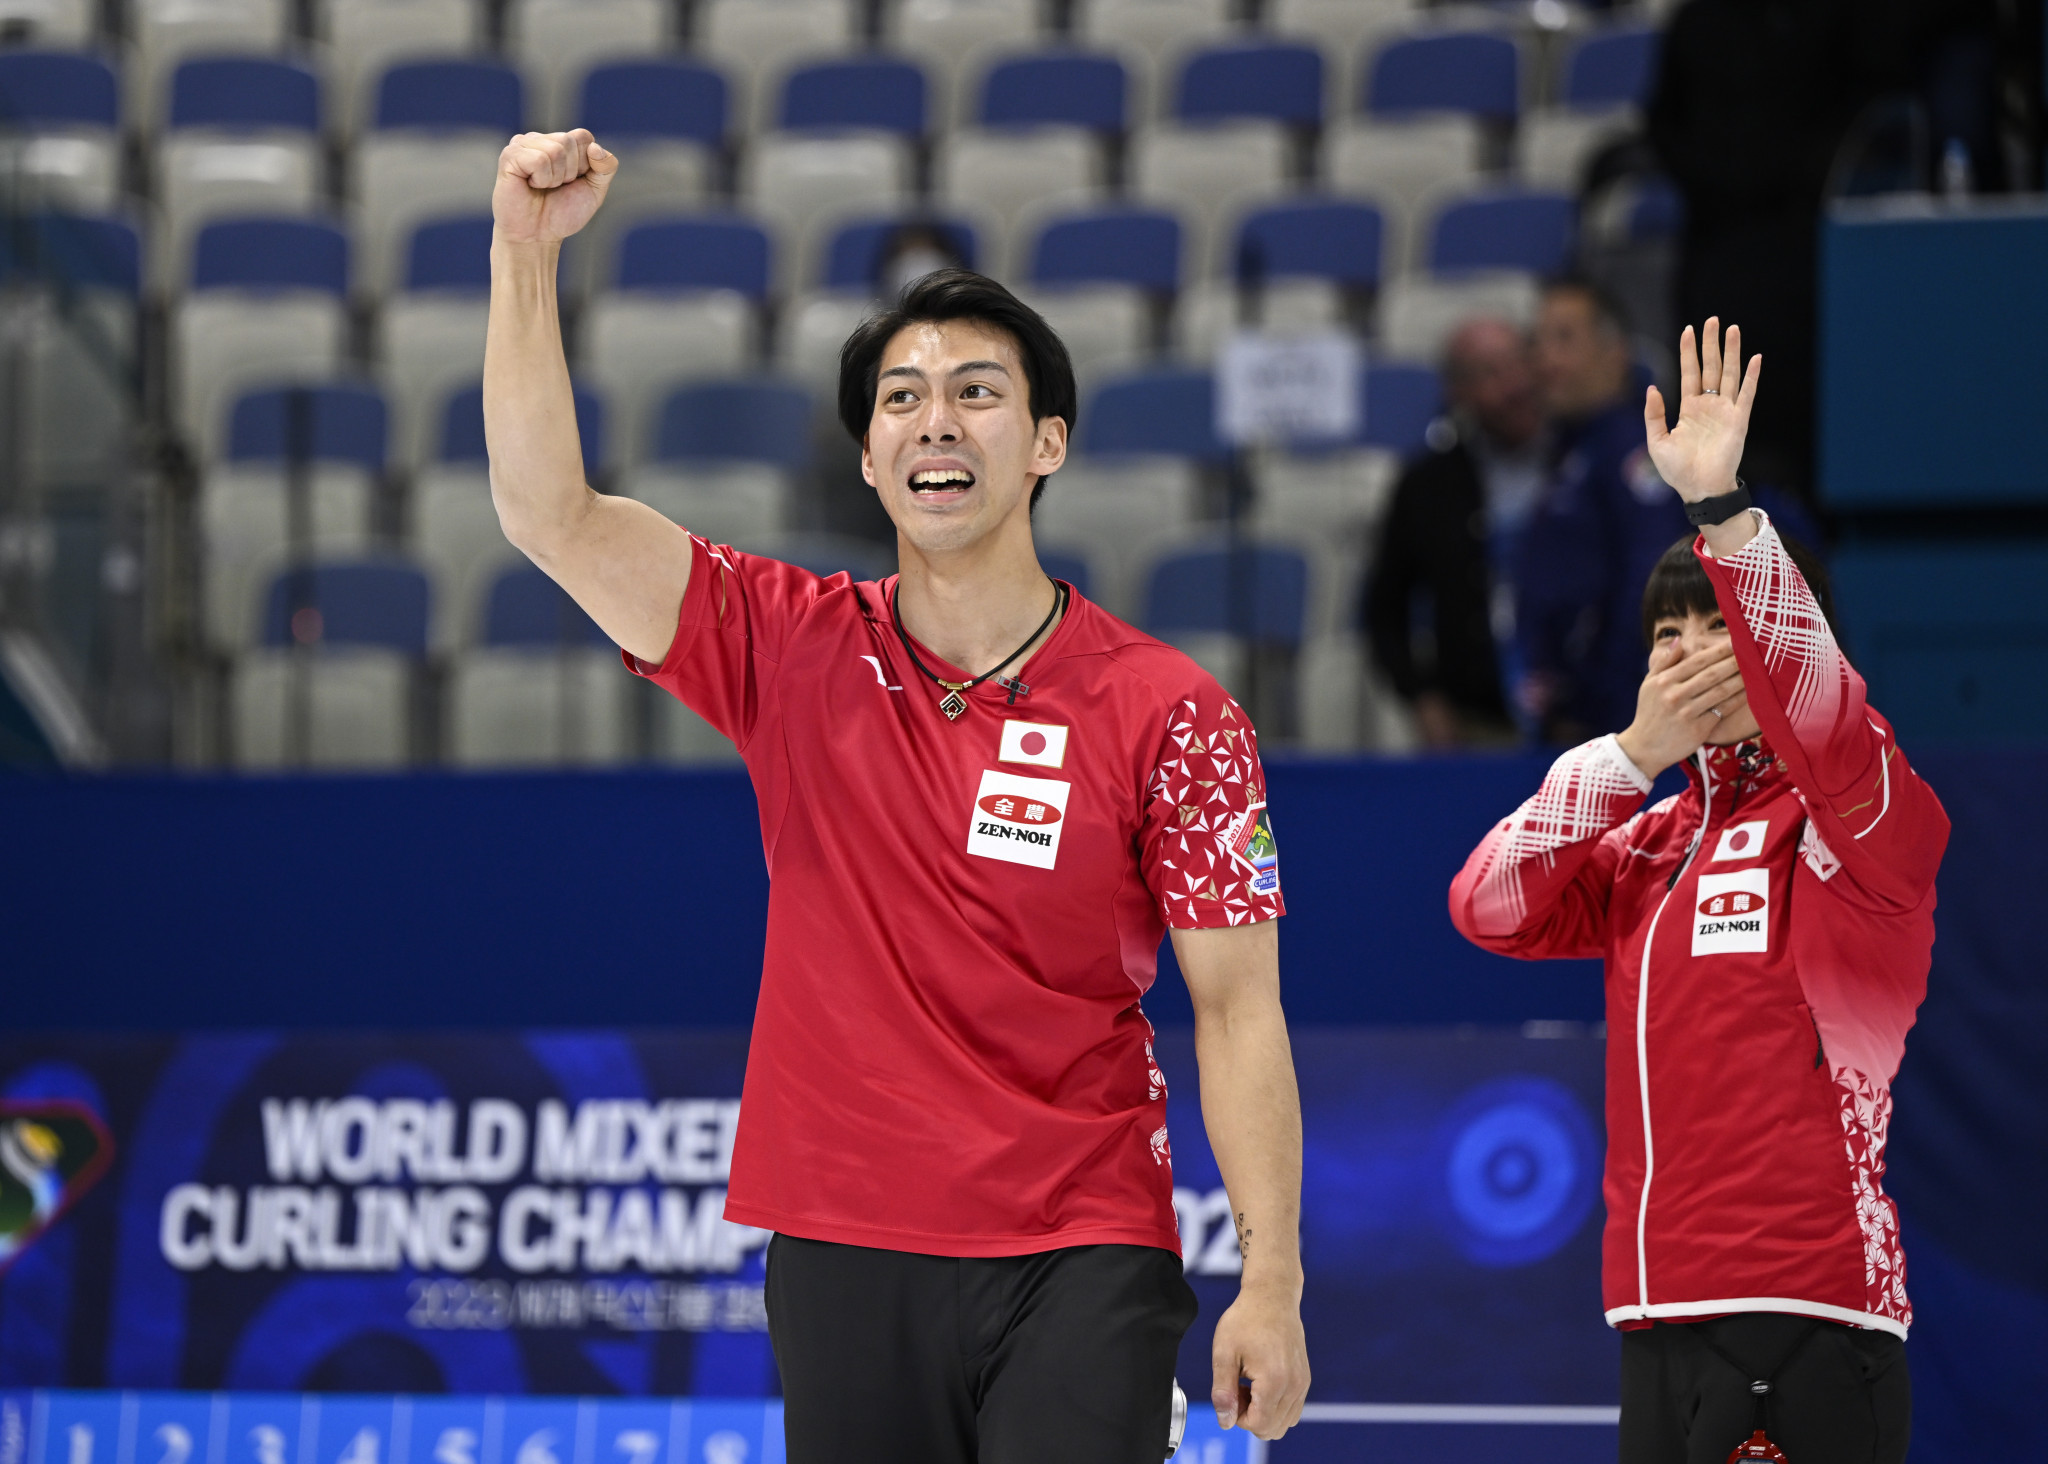 US and Japan reach World Mixed Doubles Curling Championship final